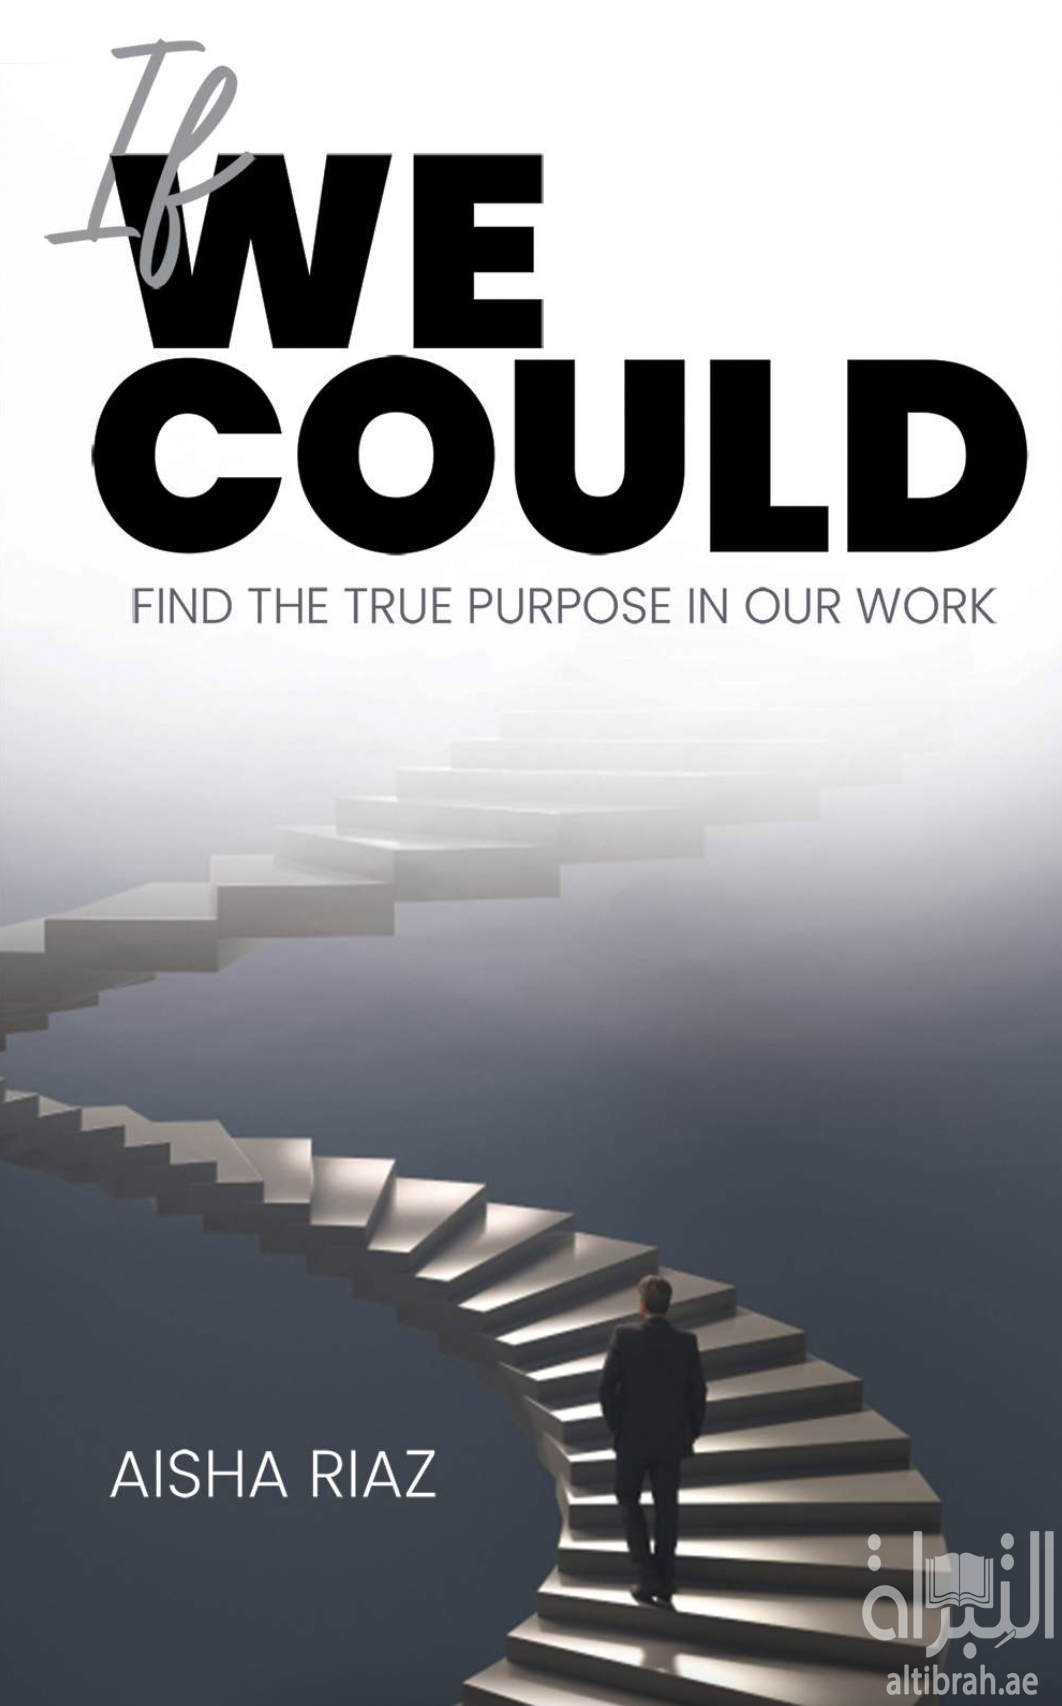 If We Could - Find The True Purpose In Our Work